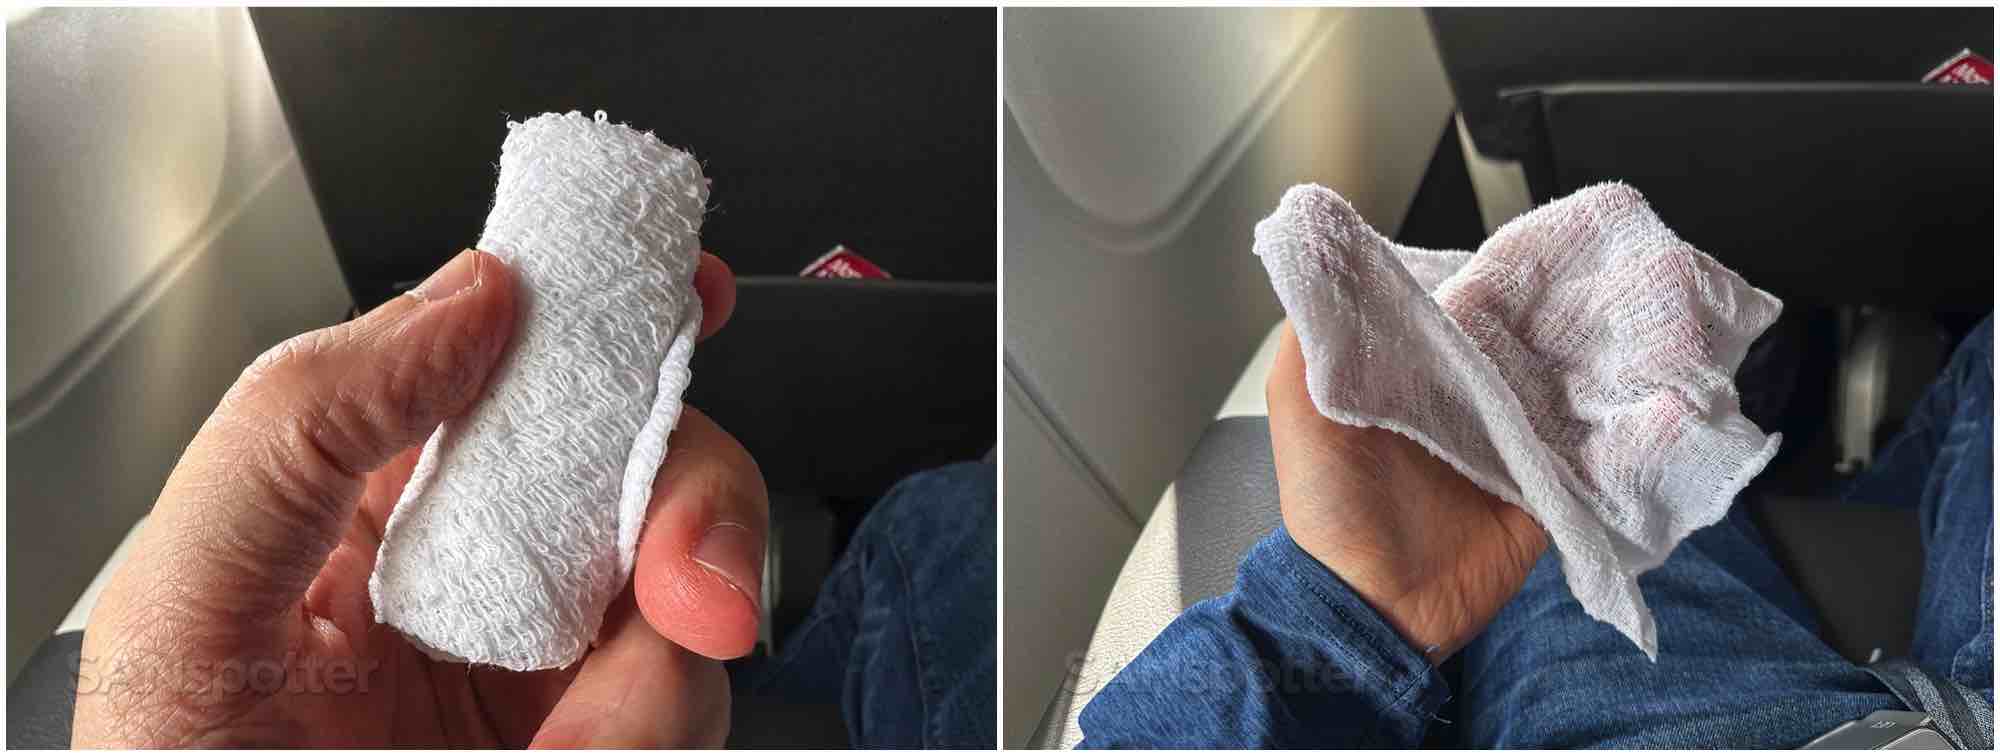 American Airlines A320 first class hot towel